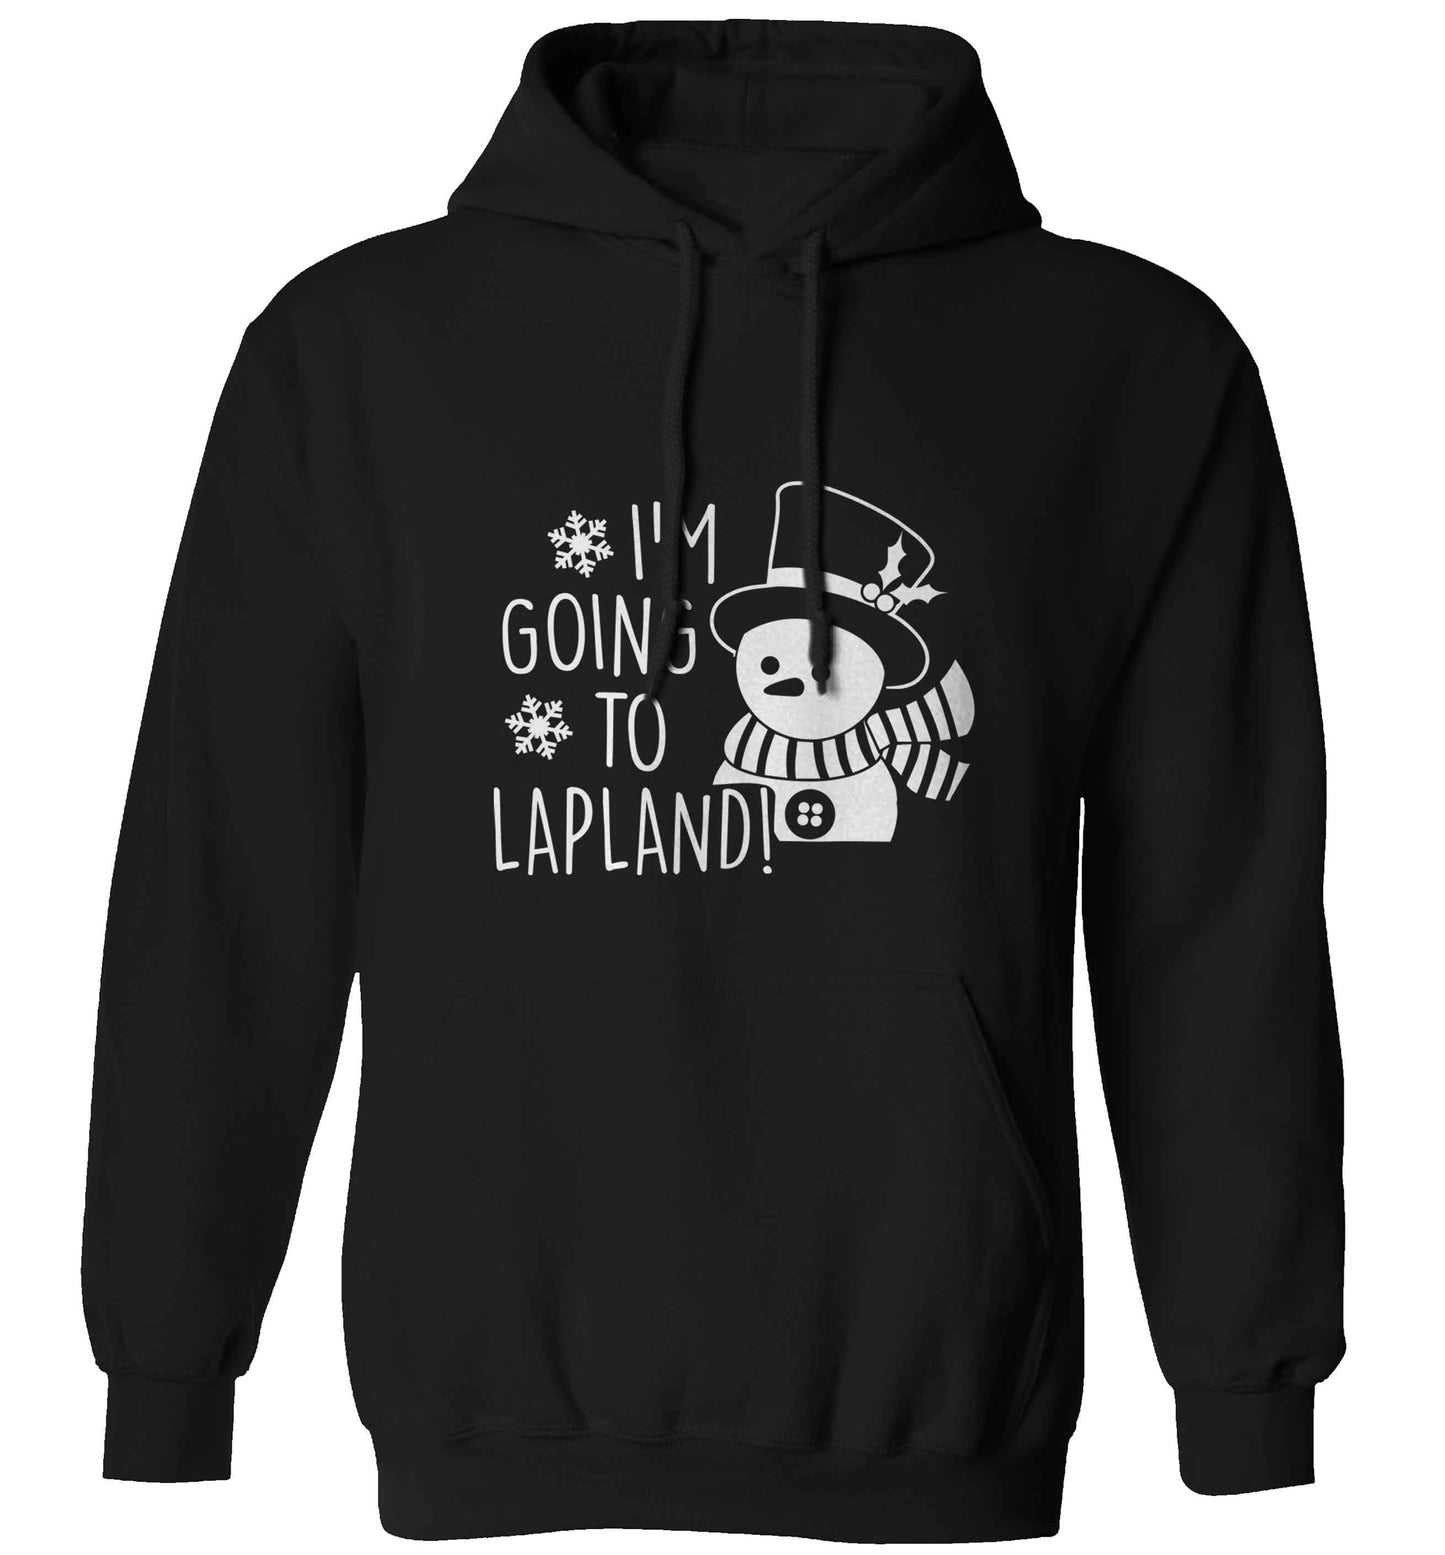 I'm going to Lapland adults unisex black hoodie 2XL